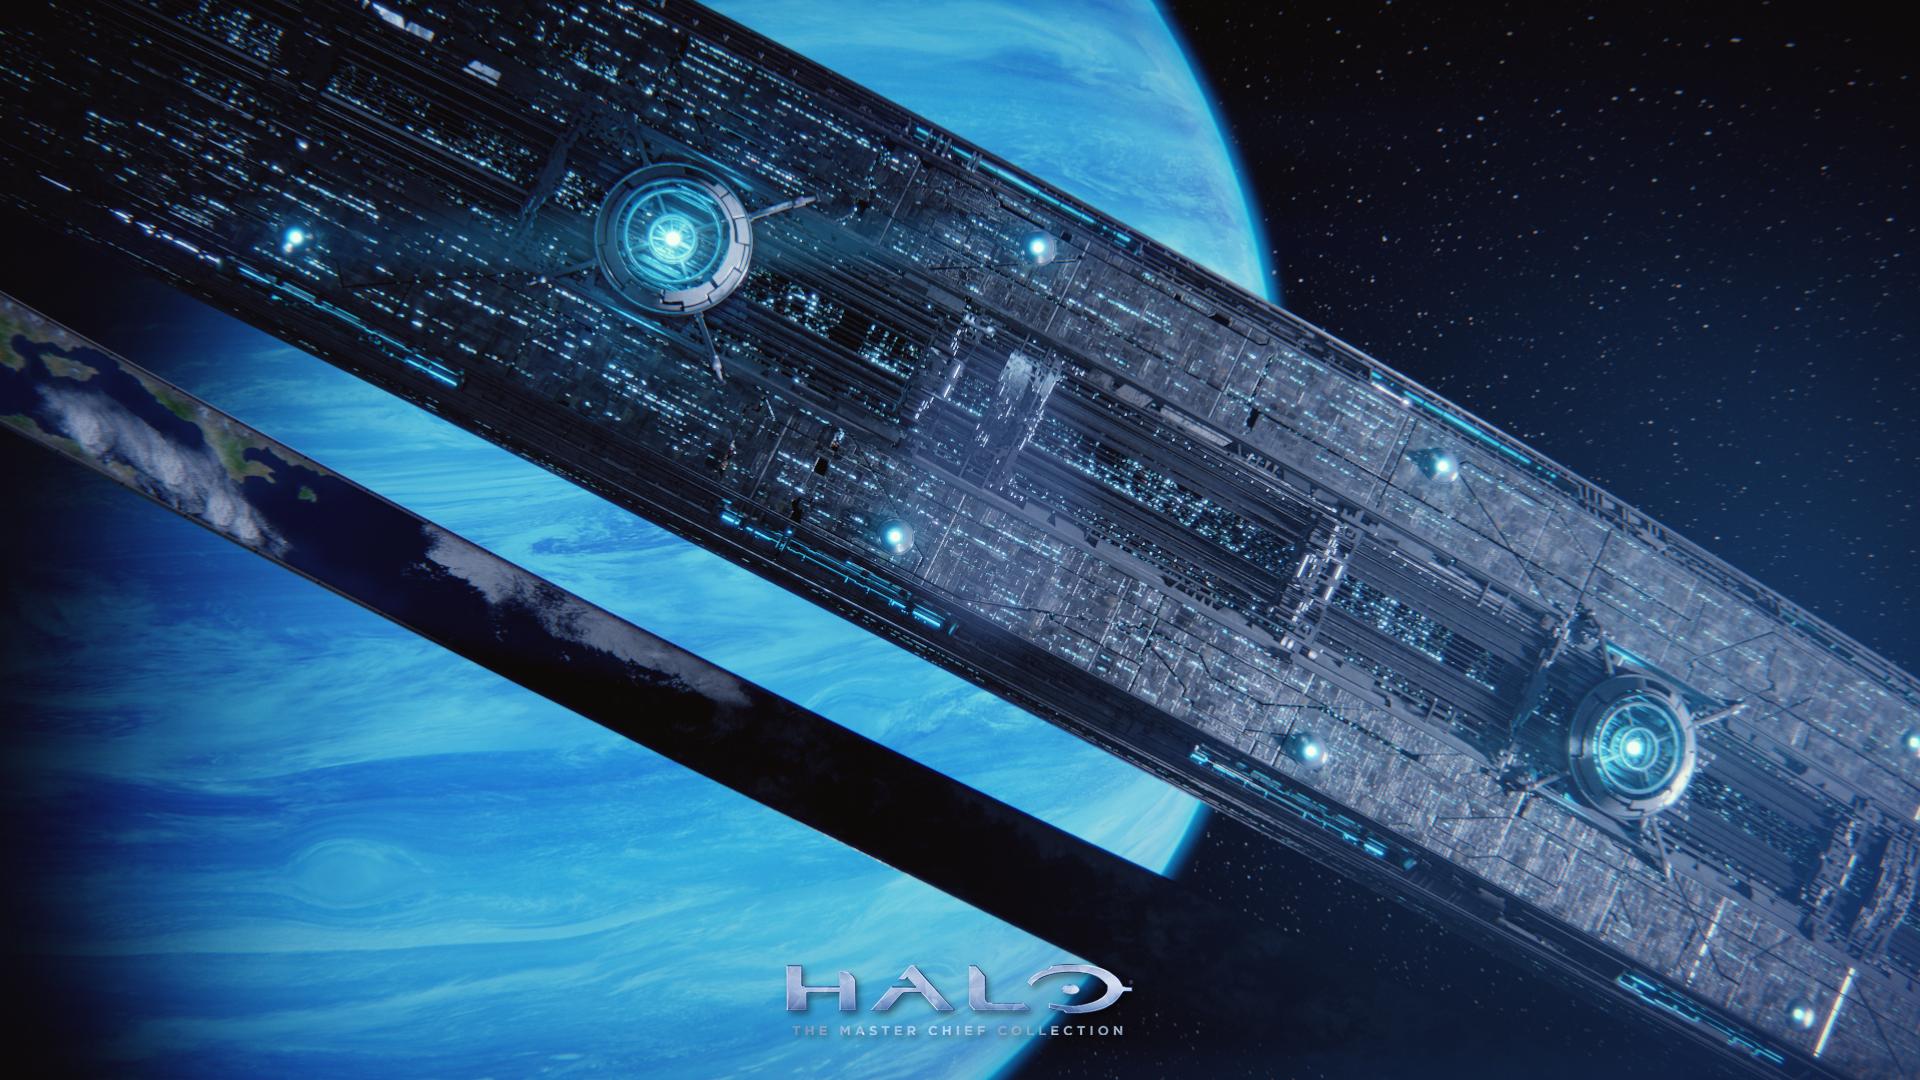 Free download Halo Ring HD Image Wallpapers 14417 Amazing Wallpaperz 1920x1...